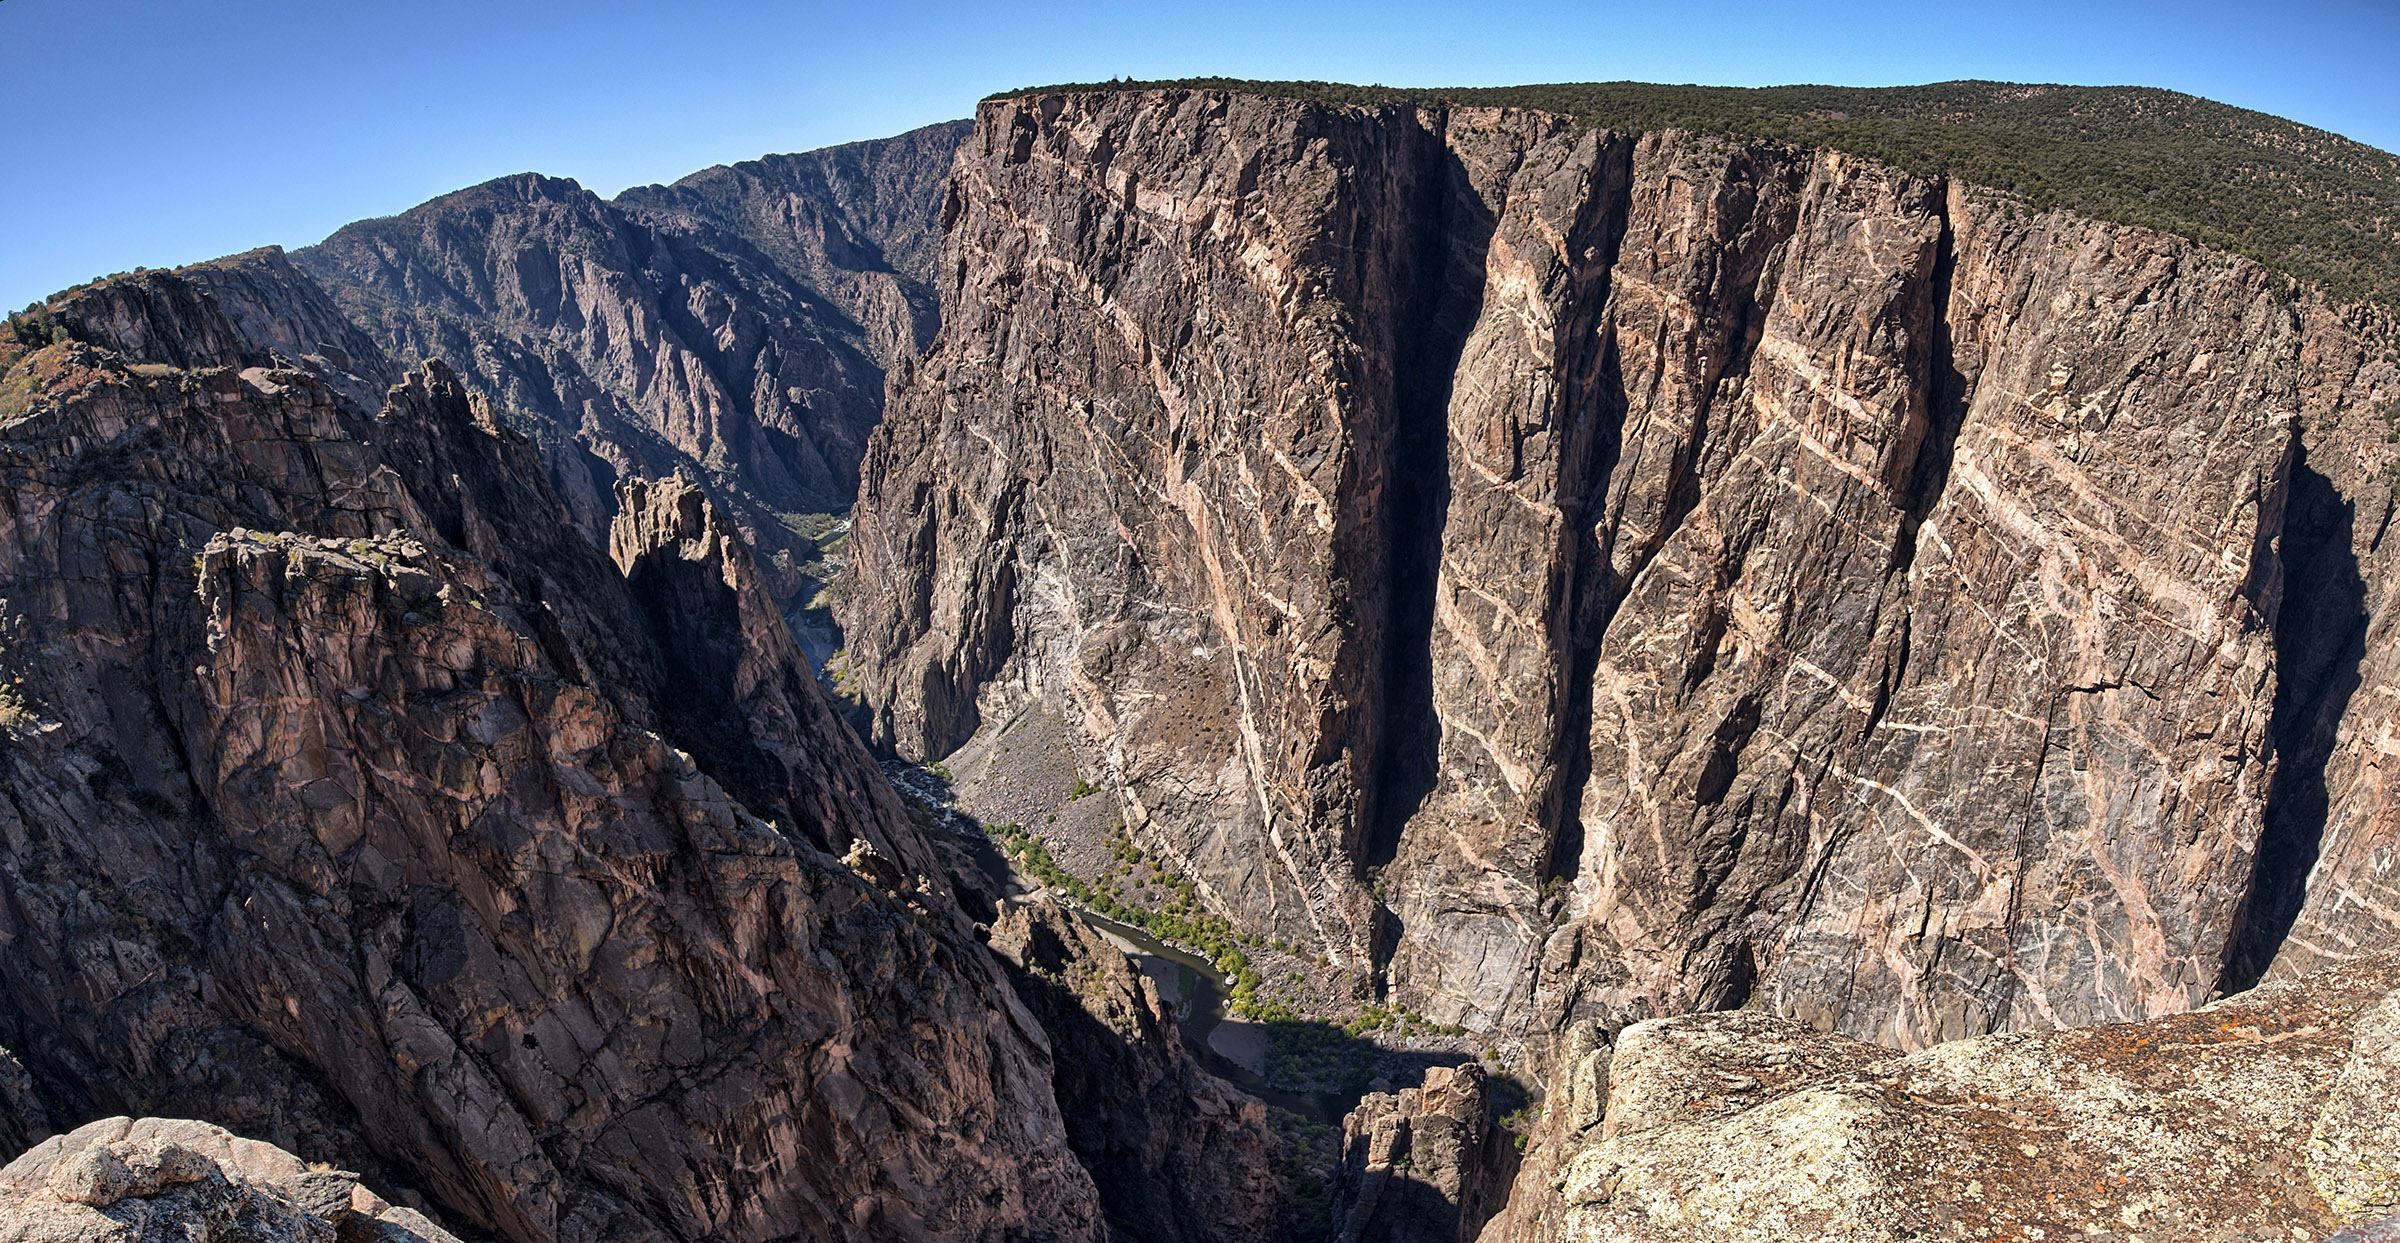 Panorama of Painted Wall, Black Canyon of the Gunnison